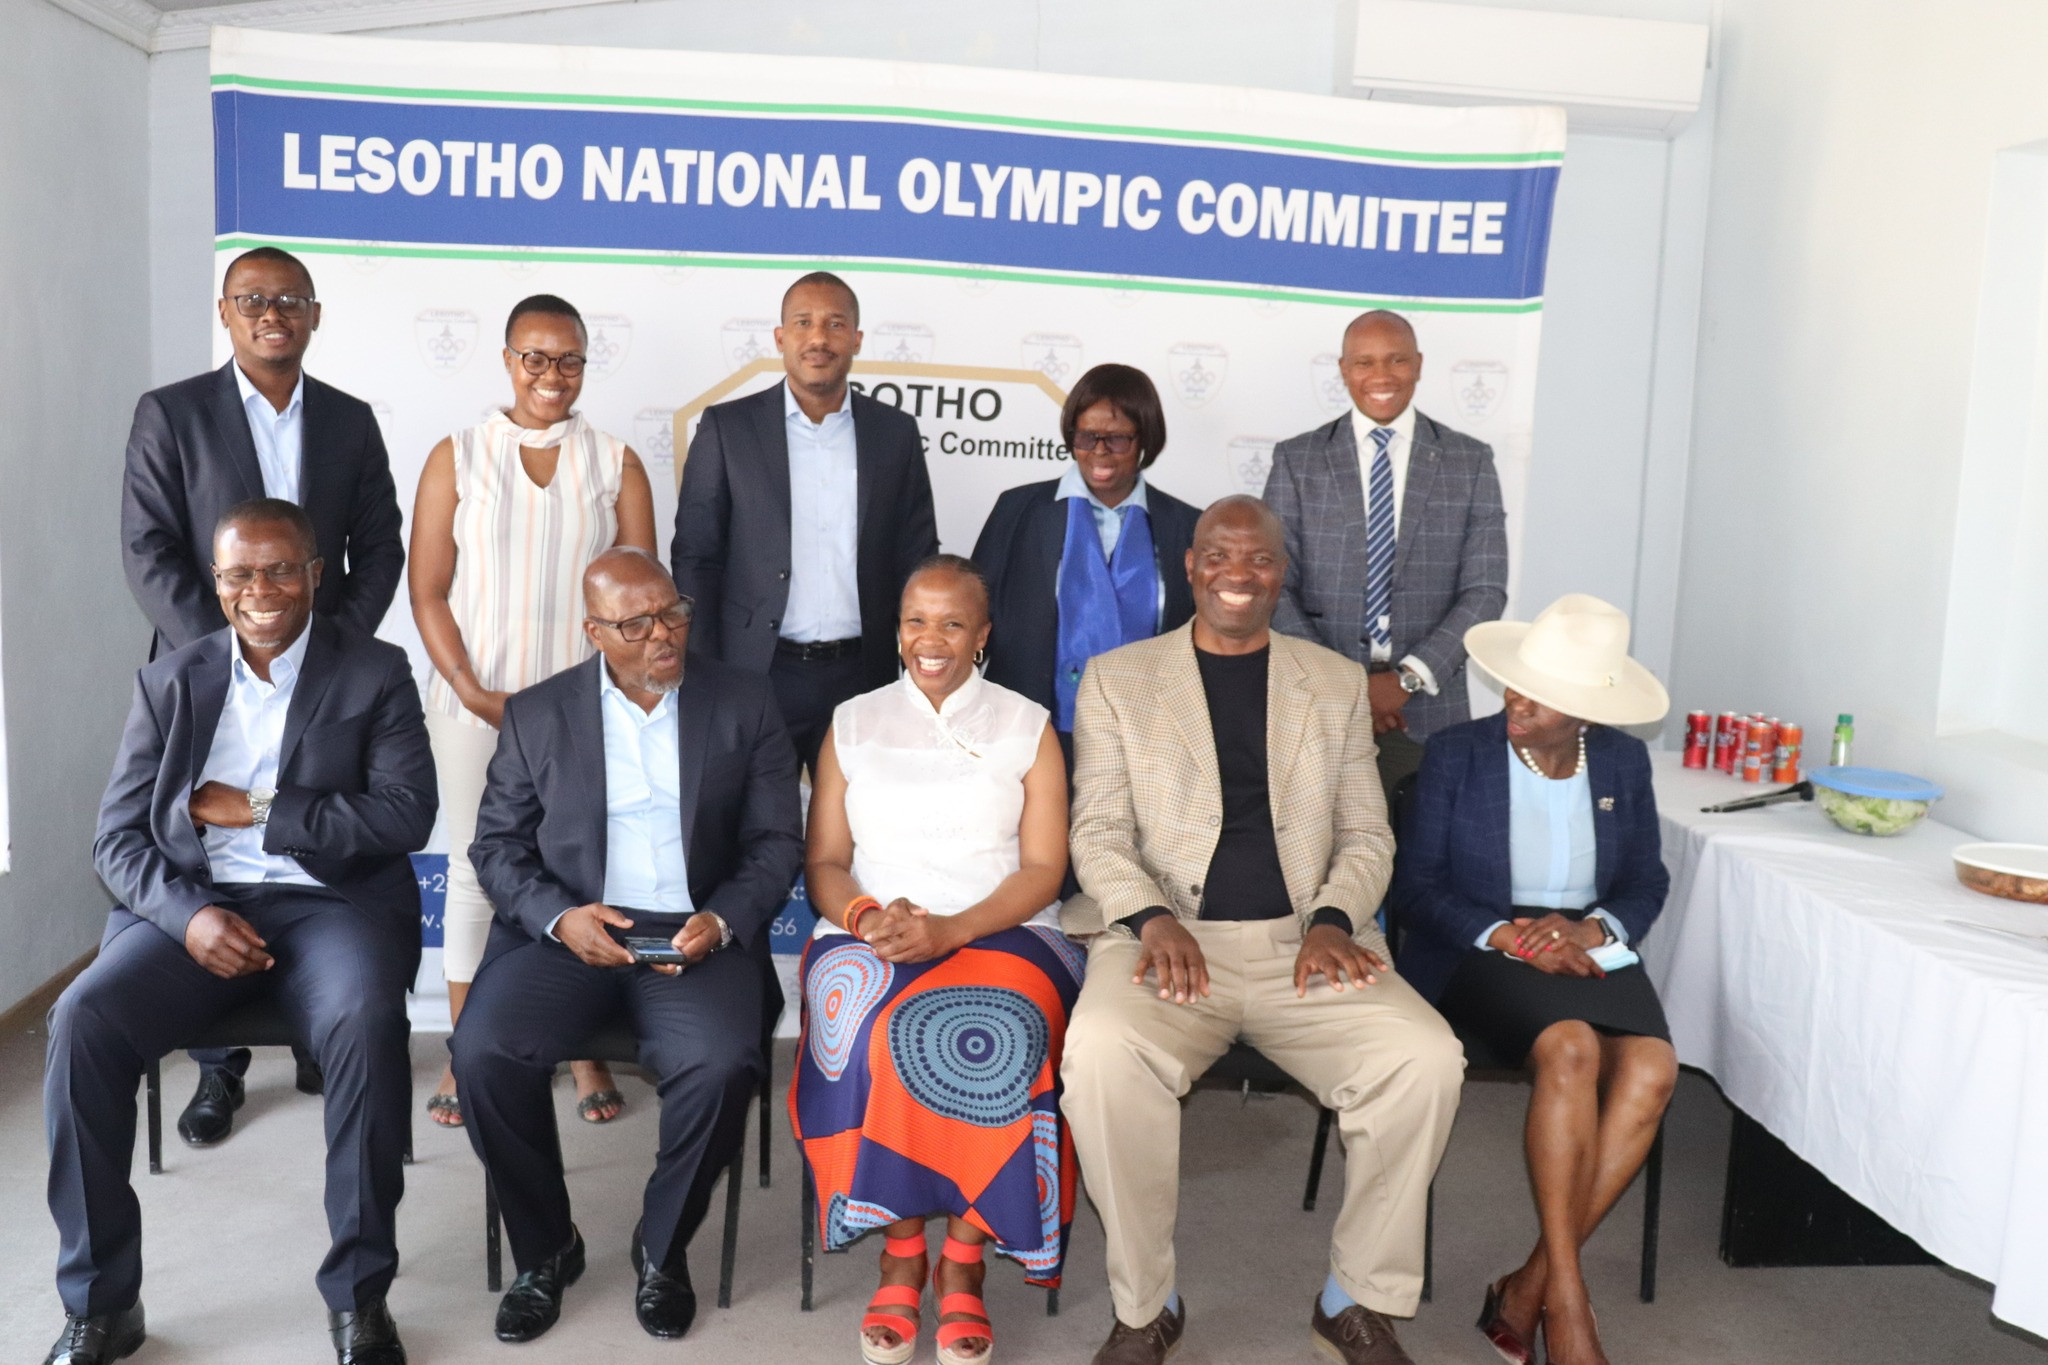 The initiative, as part of the LNOC's winter sports programme, was held in Afriski ©Lesotho National Olympic Committee